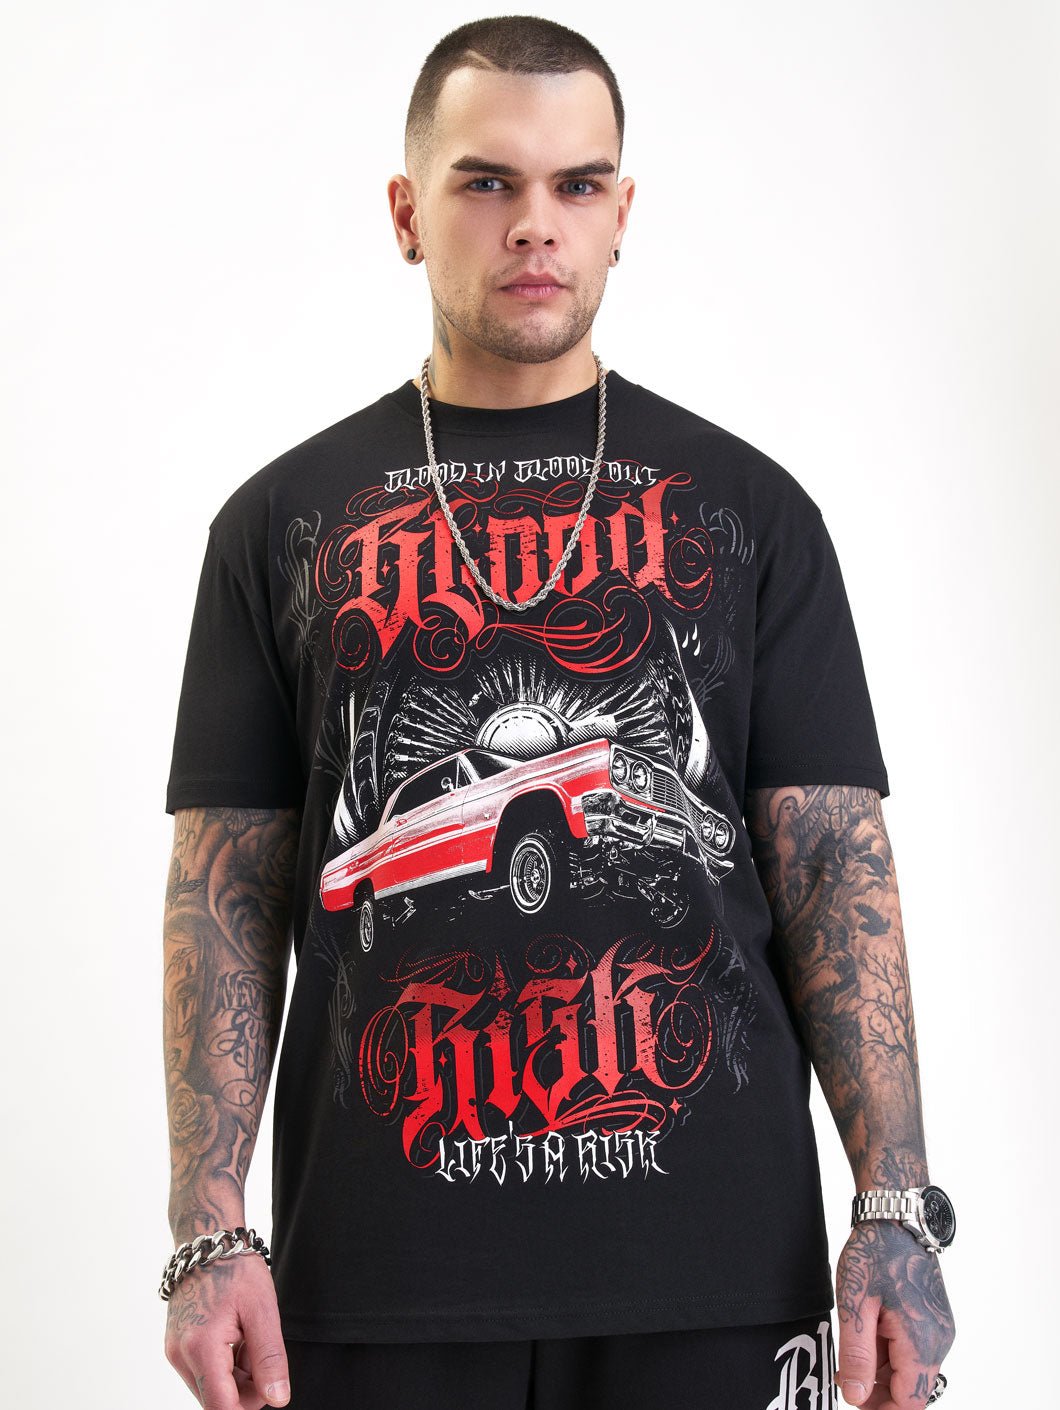 Blood In Blood Out Tavos T-Shirt - 8